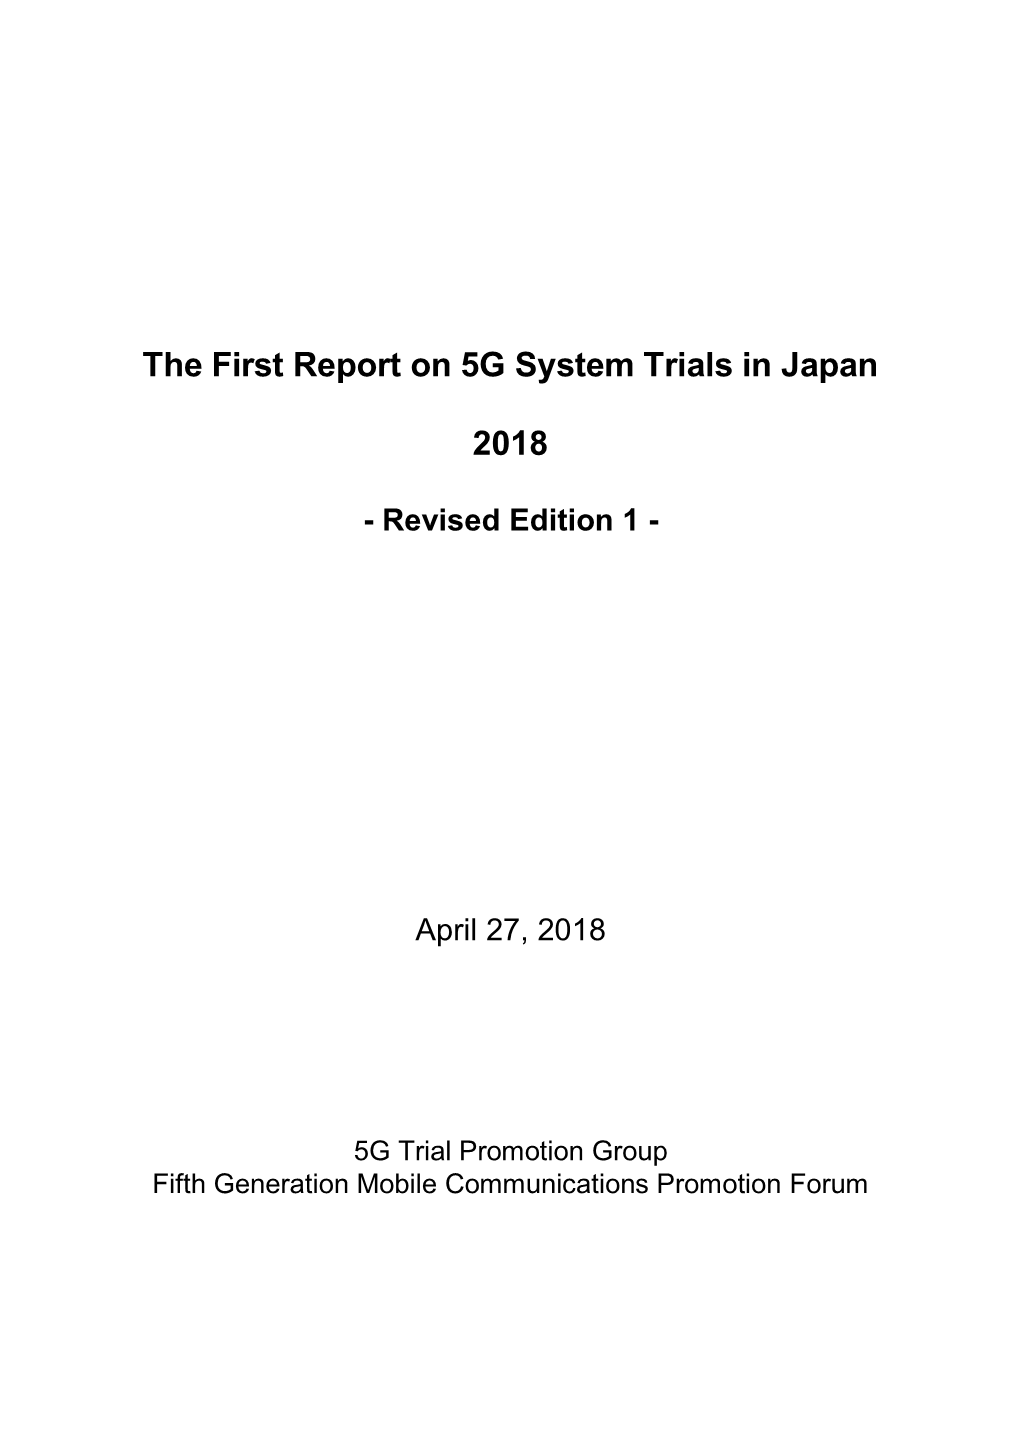 The First Report on 5G System Trials in Japan 2018 Rev.1